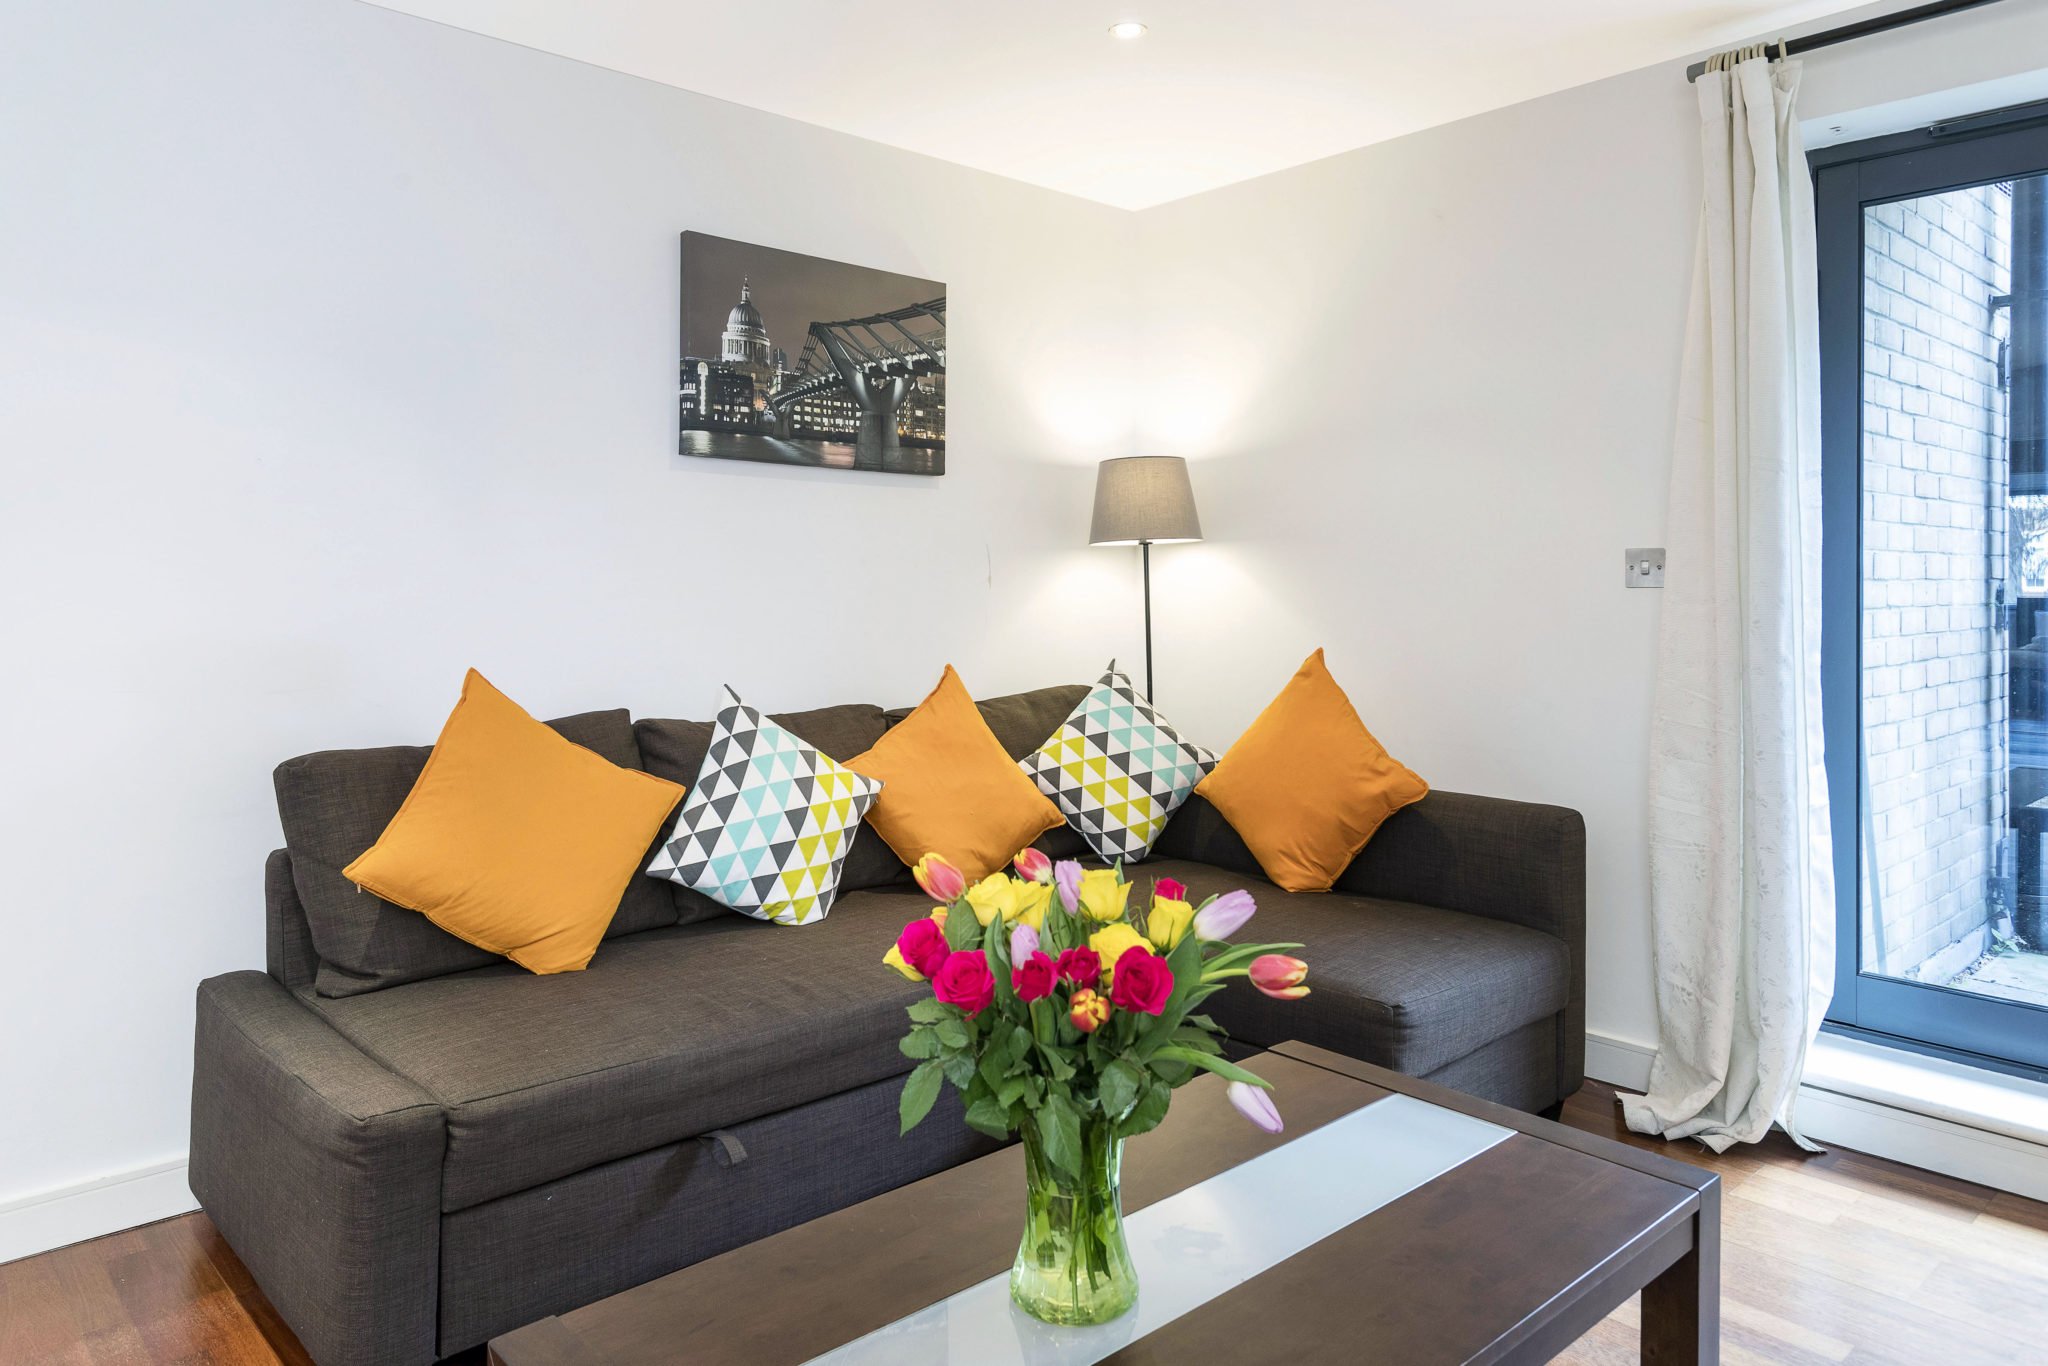 Looking-for-affordable-apartments-in-London-Euston?-why-not-book-our-lovely-Euston-Serviced-Apartment-at-William-Road.-Call-us-today-for-great-rates.